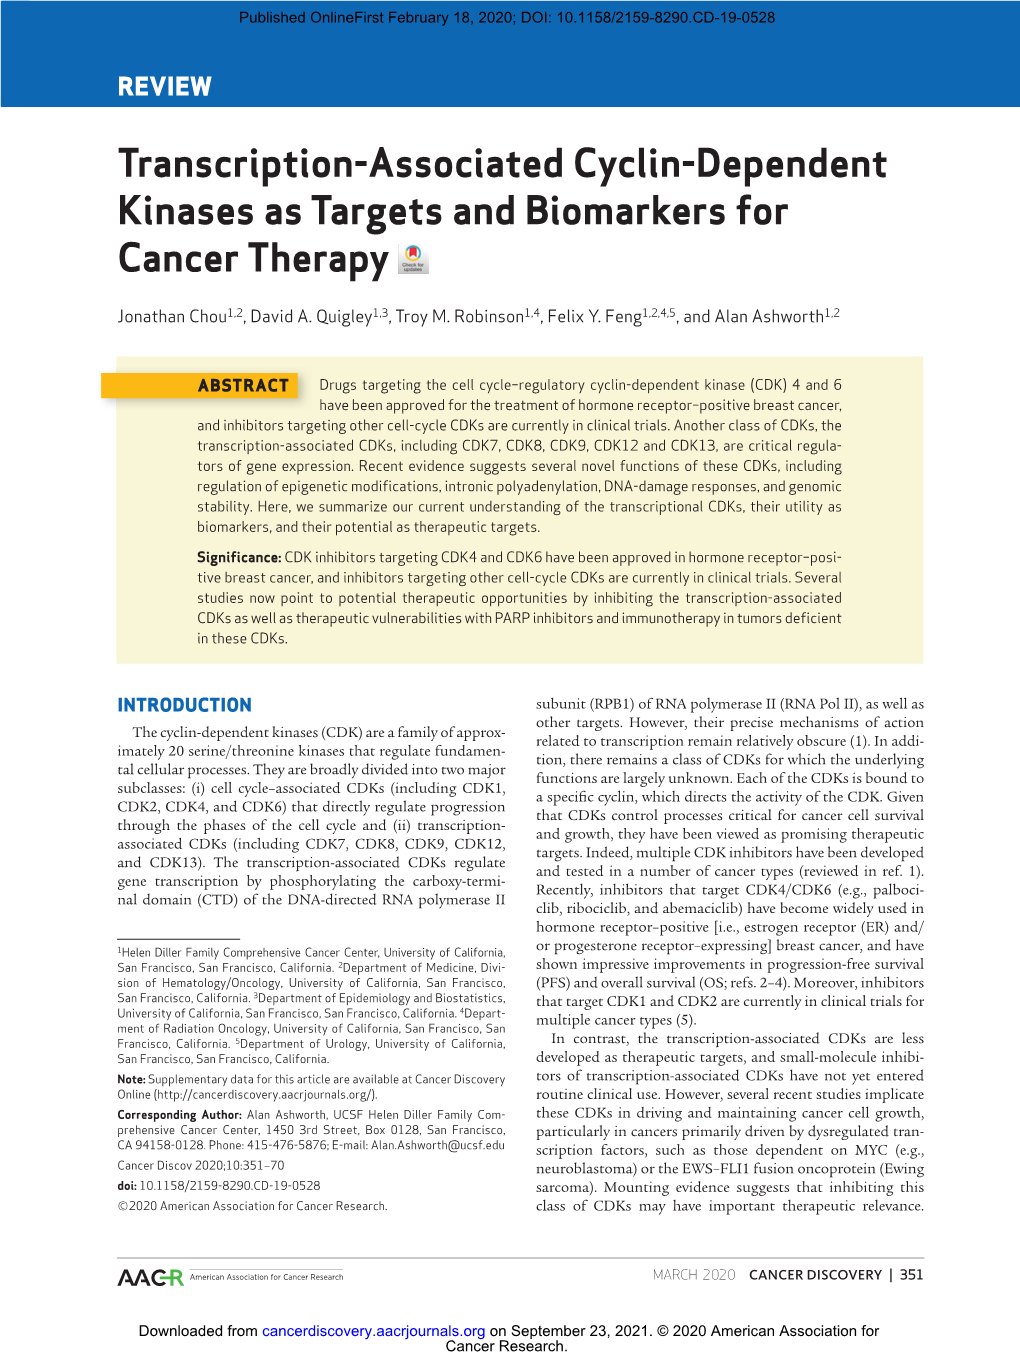 Transcription-Associated Cyclin-Dependent Kinases As Targets and Biomarkers for Cancer Therapy